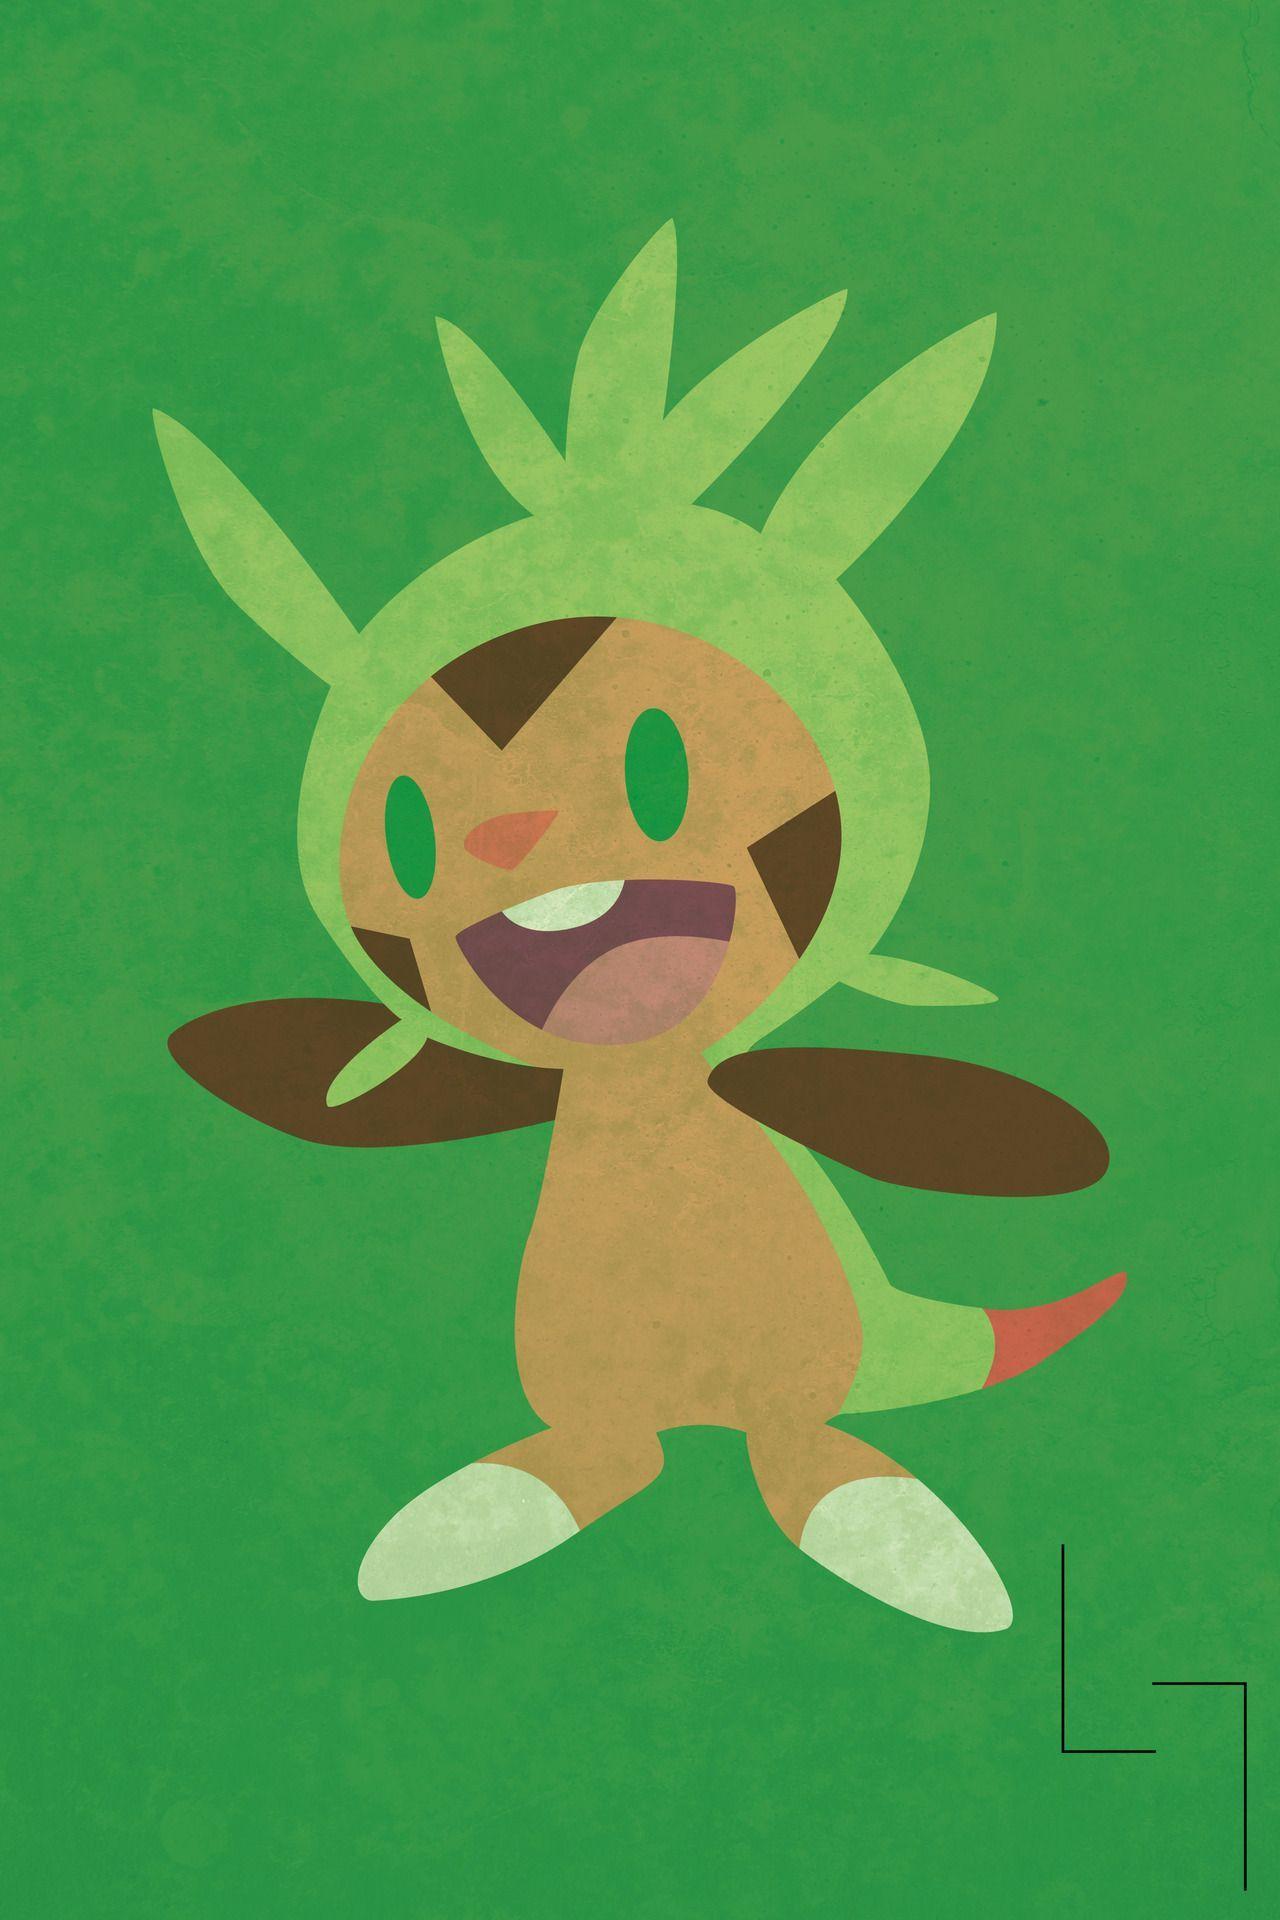 Chespin X & Y Starters by JHTY23. Pokemon